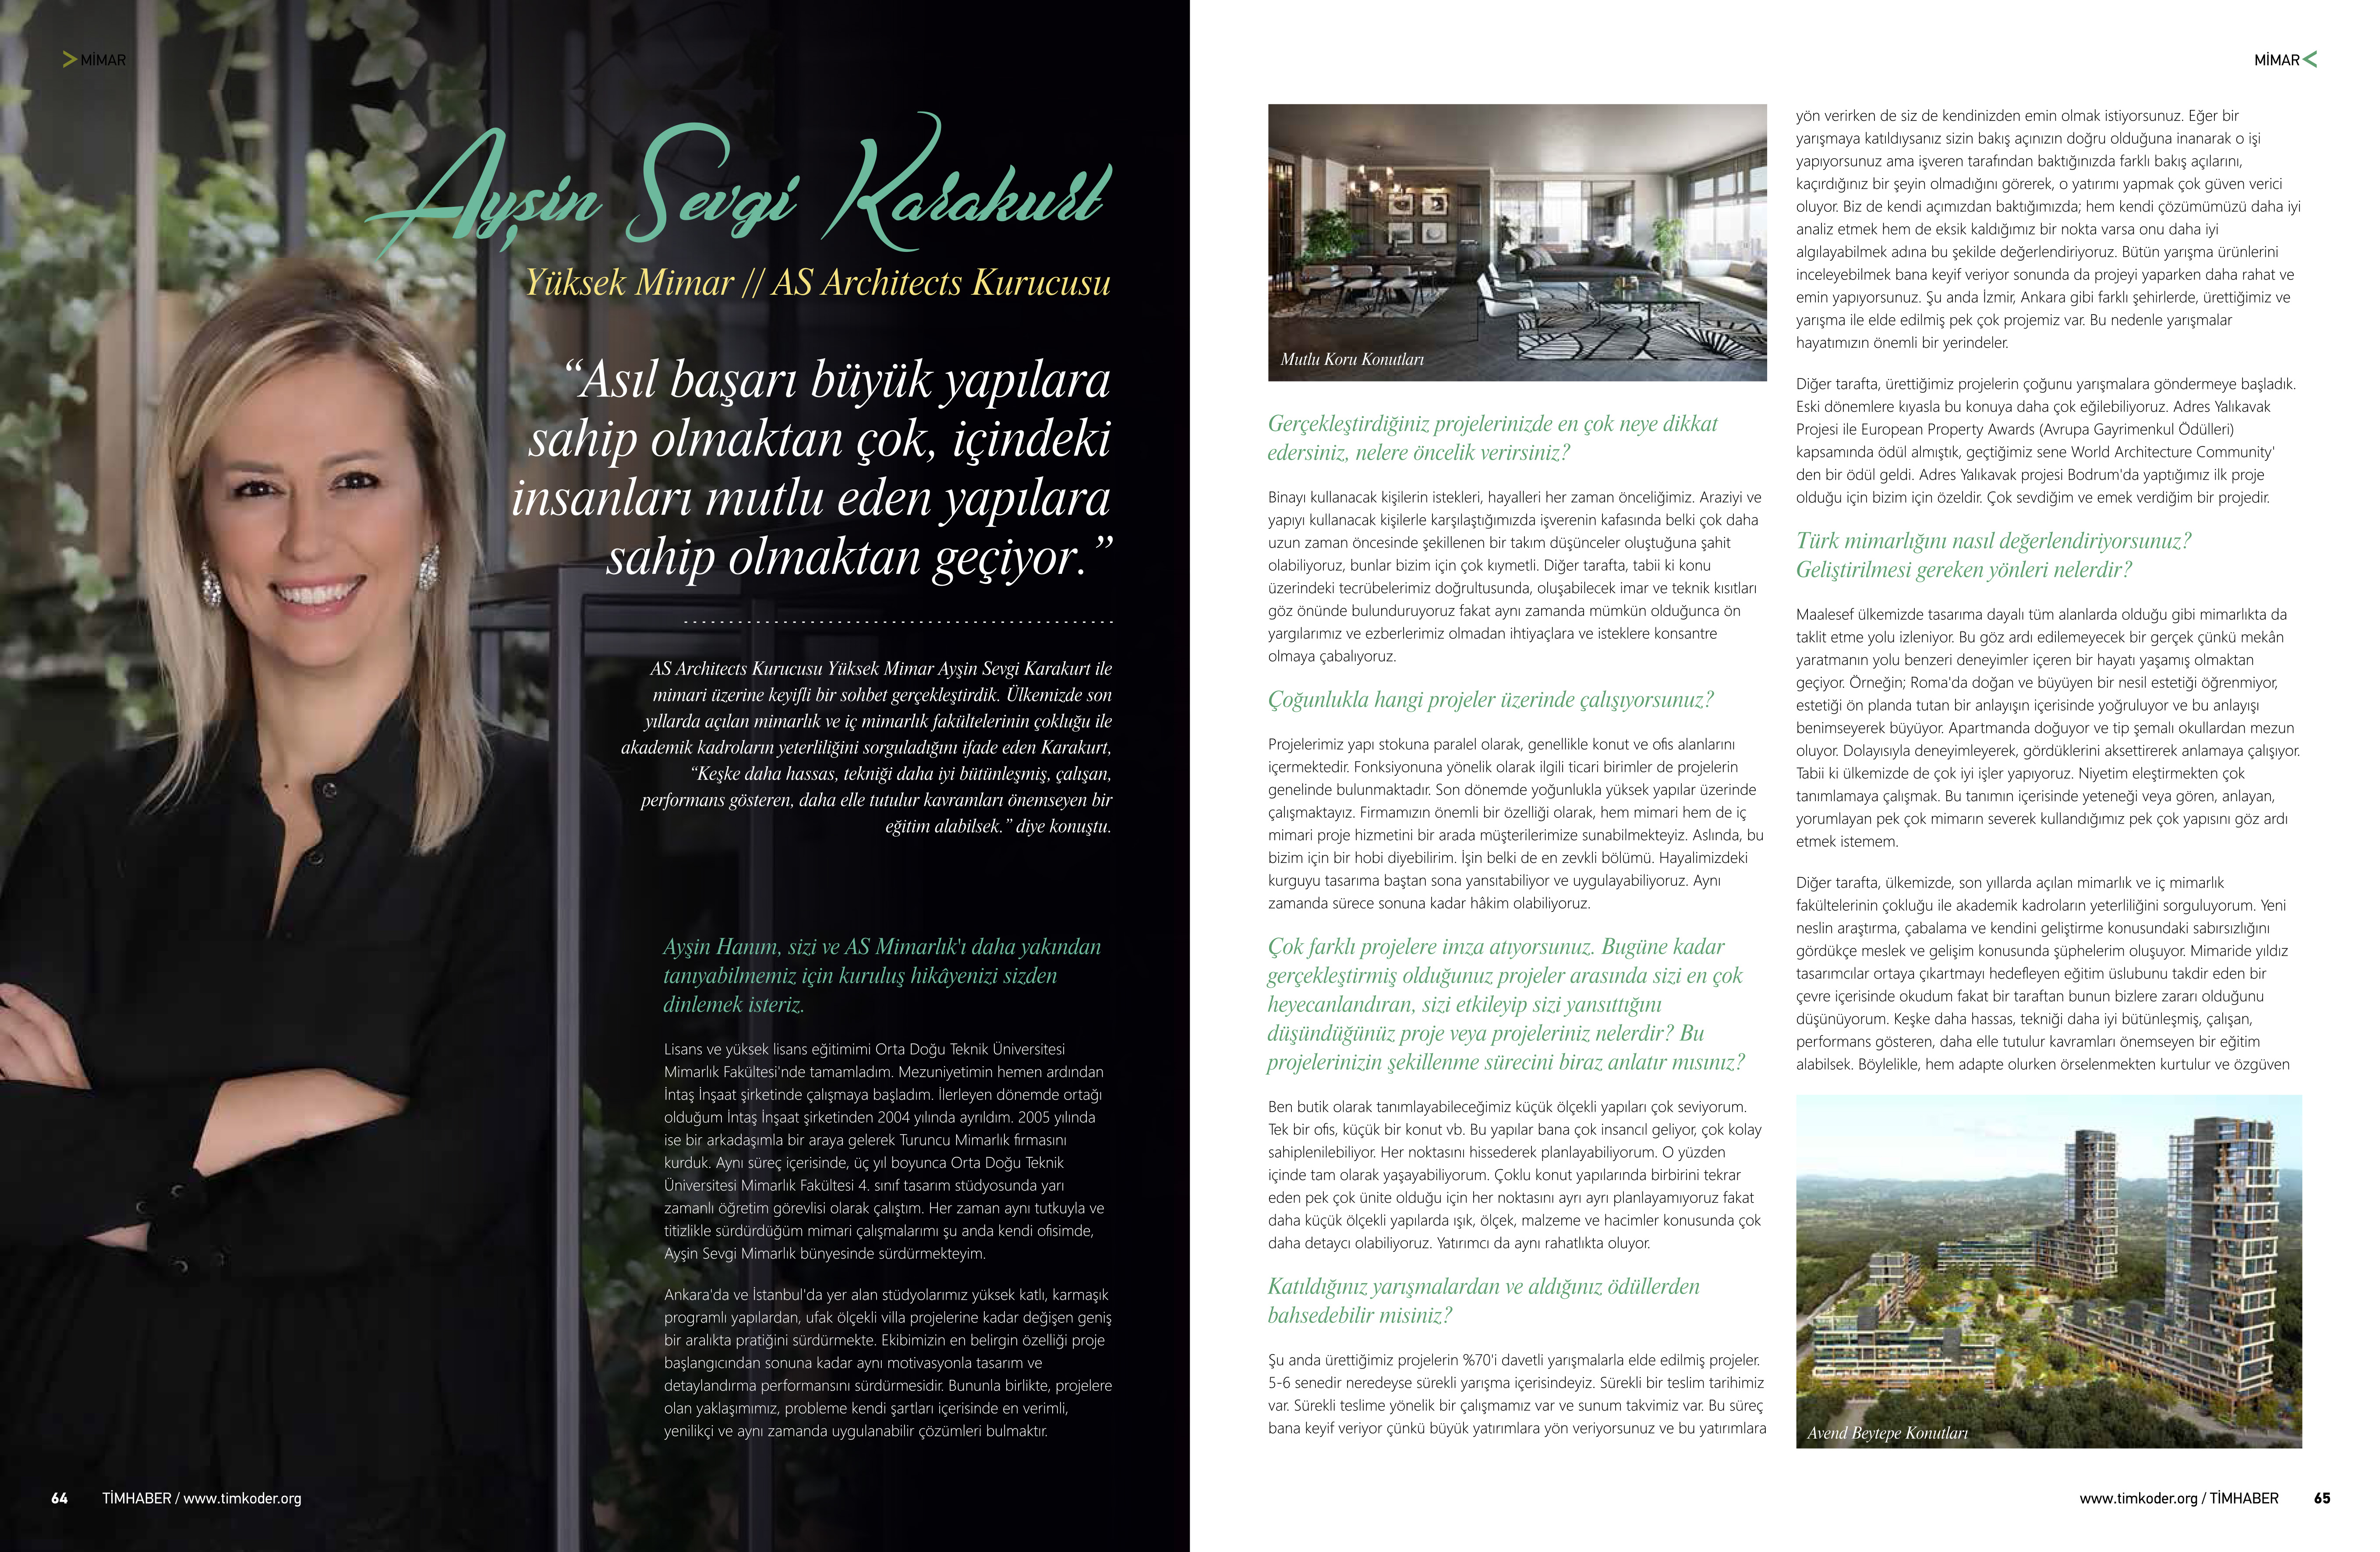  TİMHABER MAGAZINE, JANUARY - MARCH 2018 / INTERVIEW 